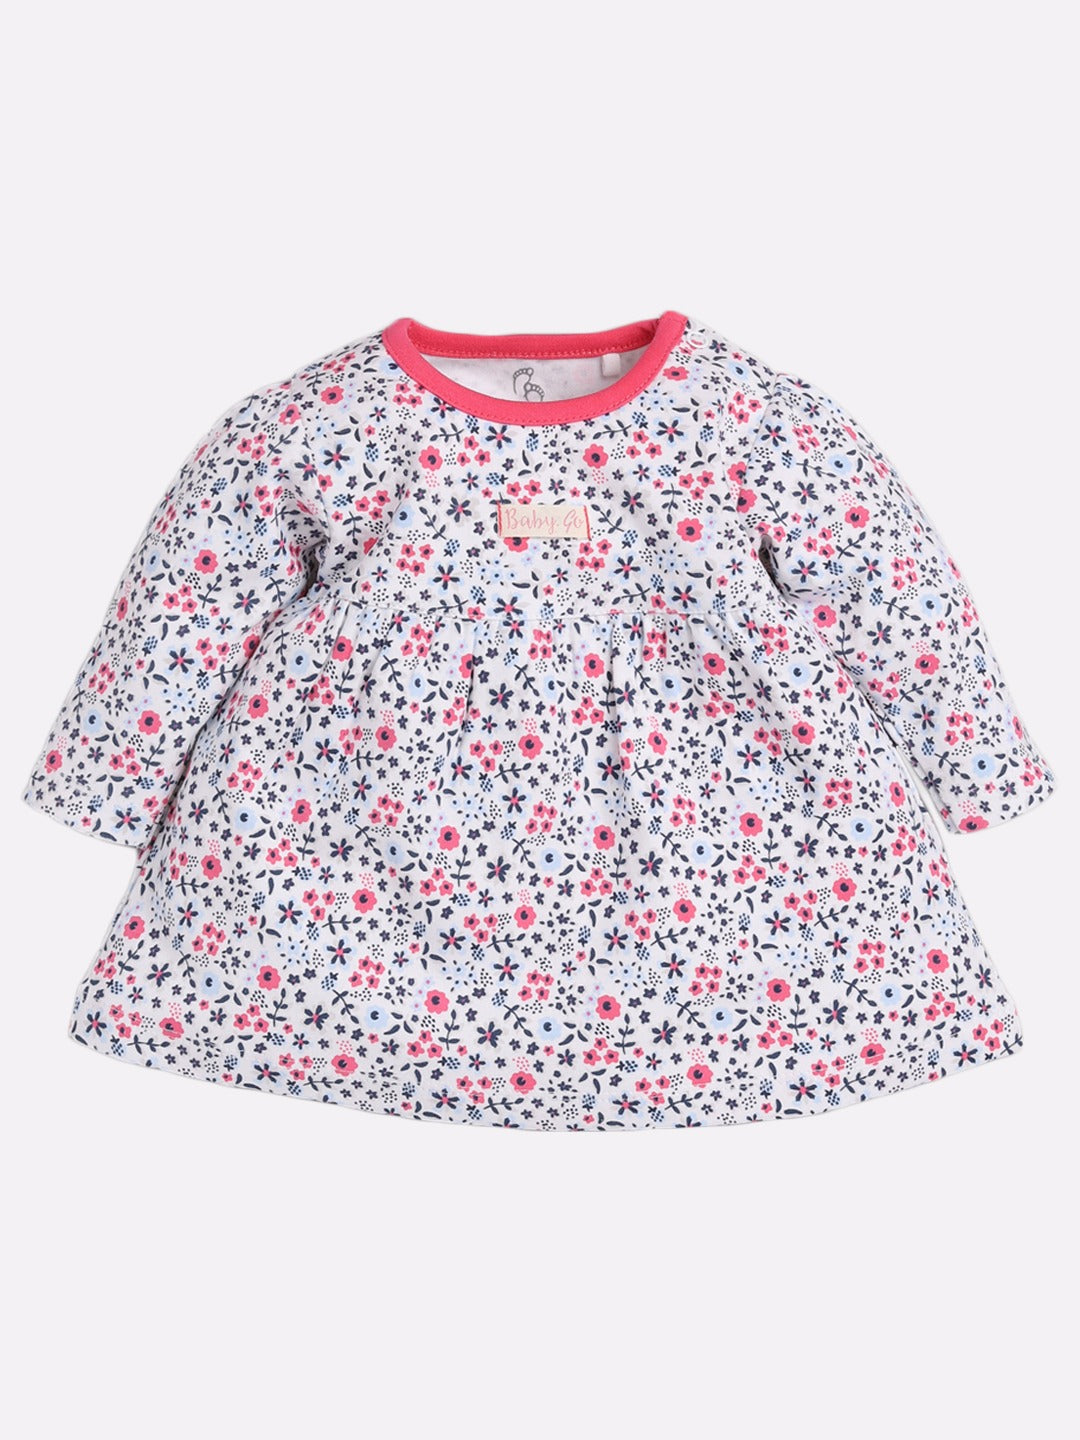 Mid/knee length baby girl frock for casual wear-PINK